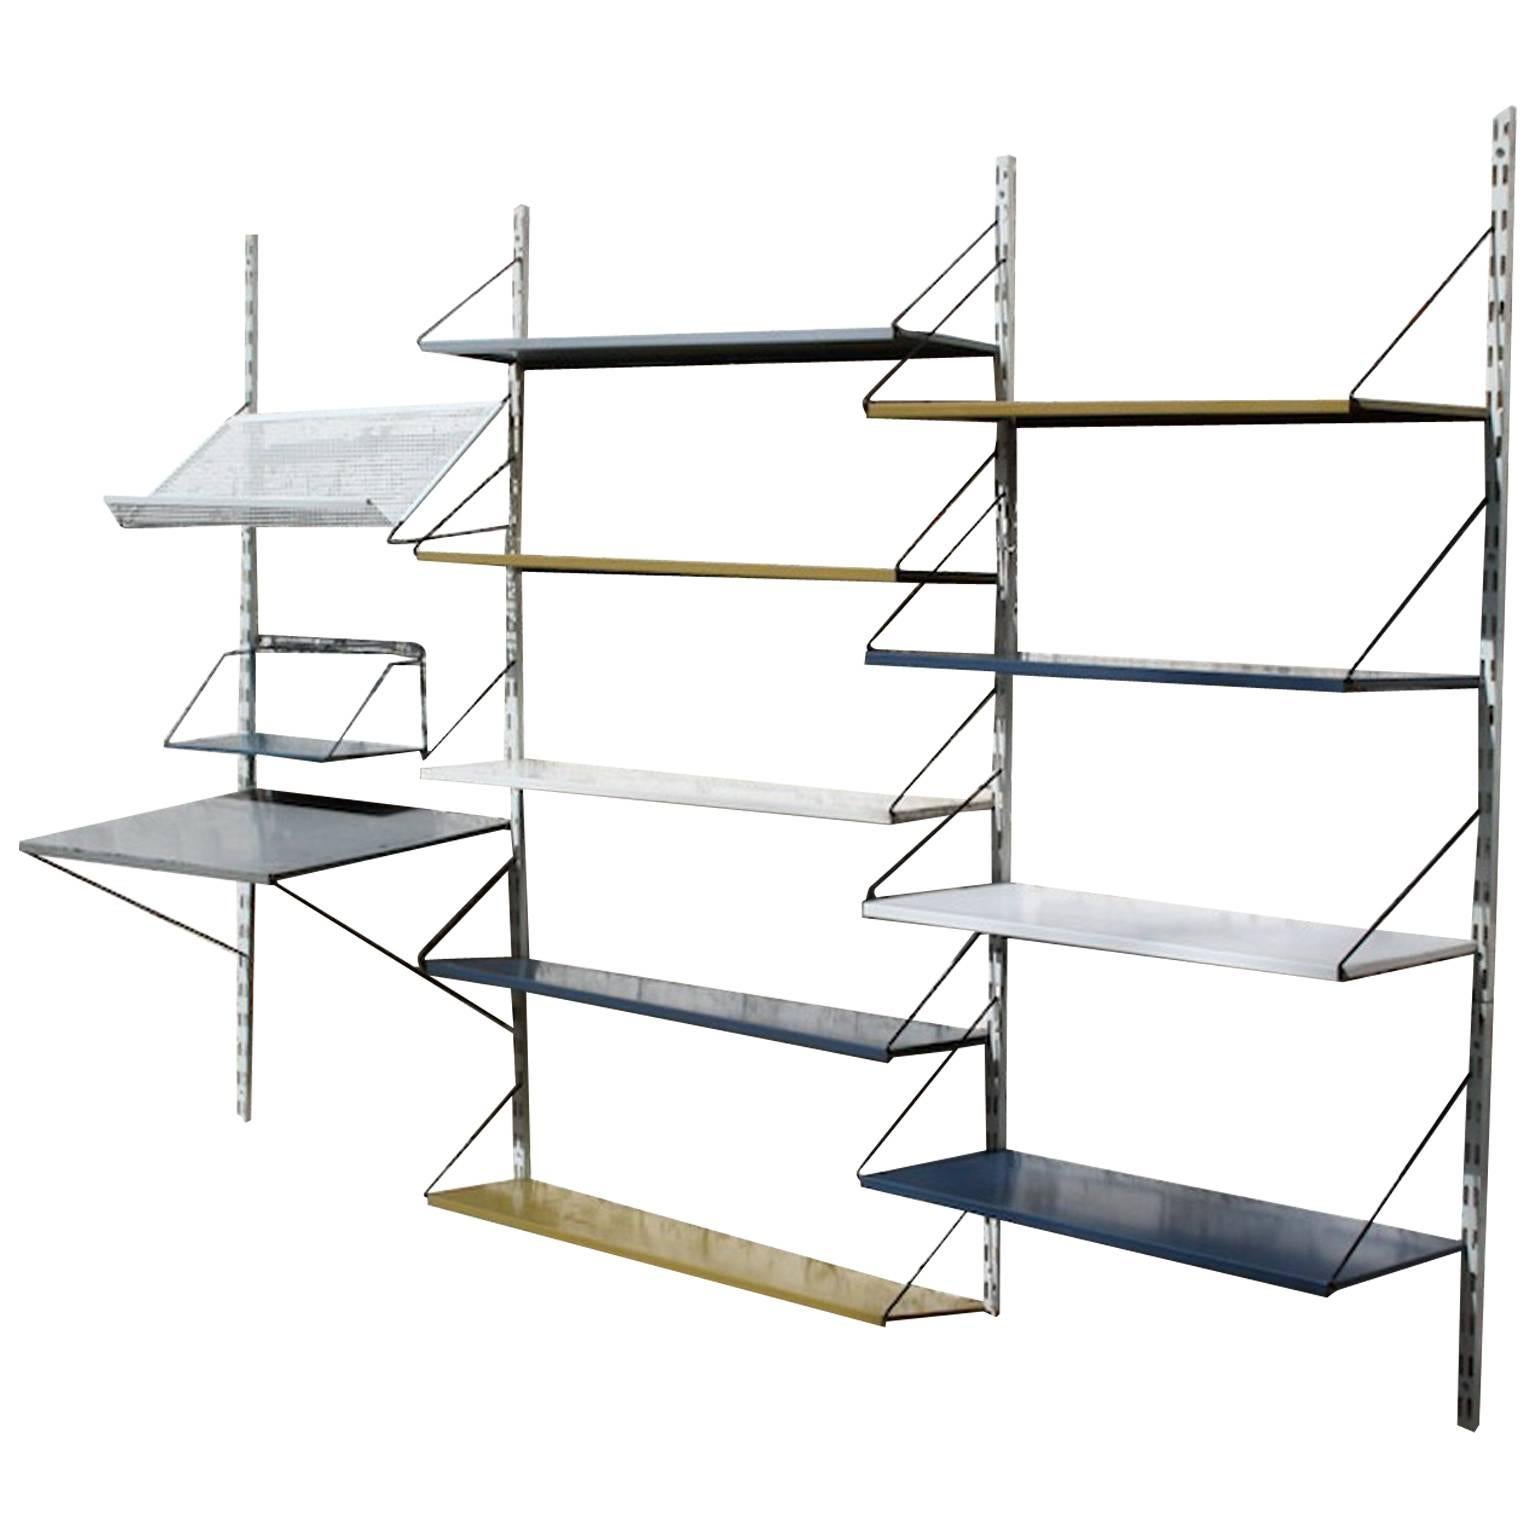 Wall System or Unit by Tjerk Reijenga for Pilastro, Dutch Design, 1955 For Sale